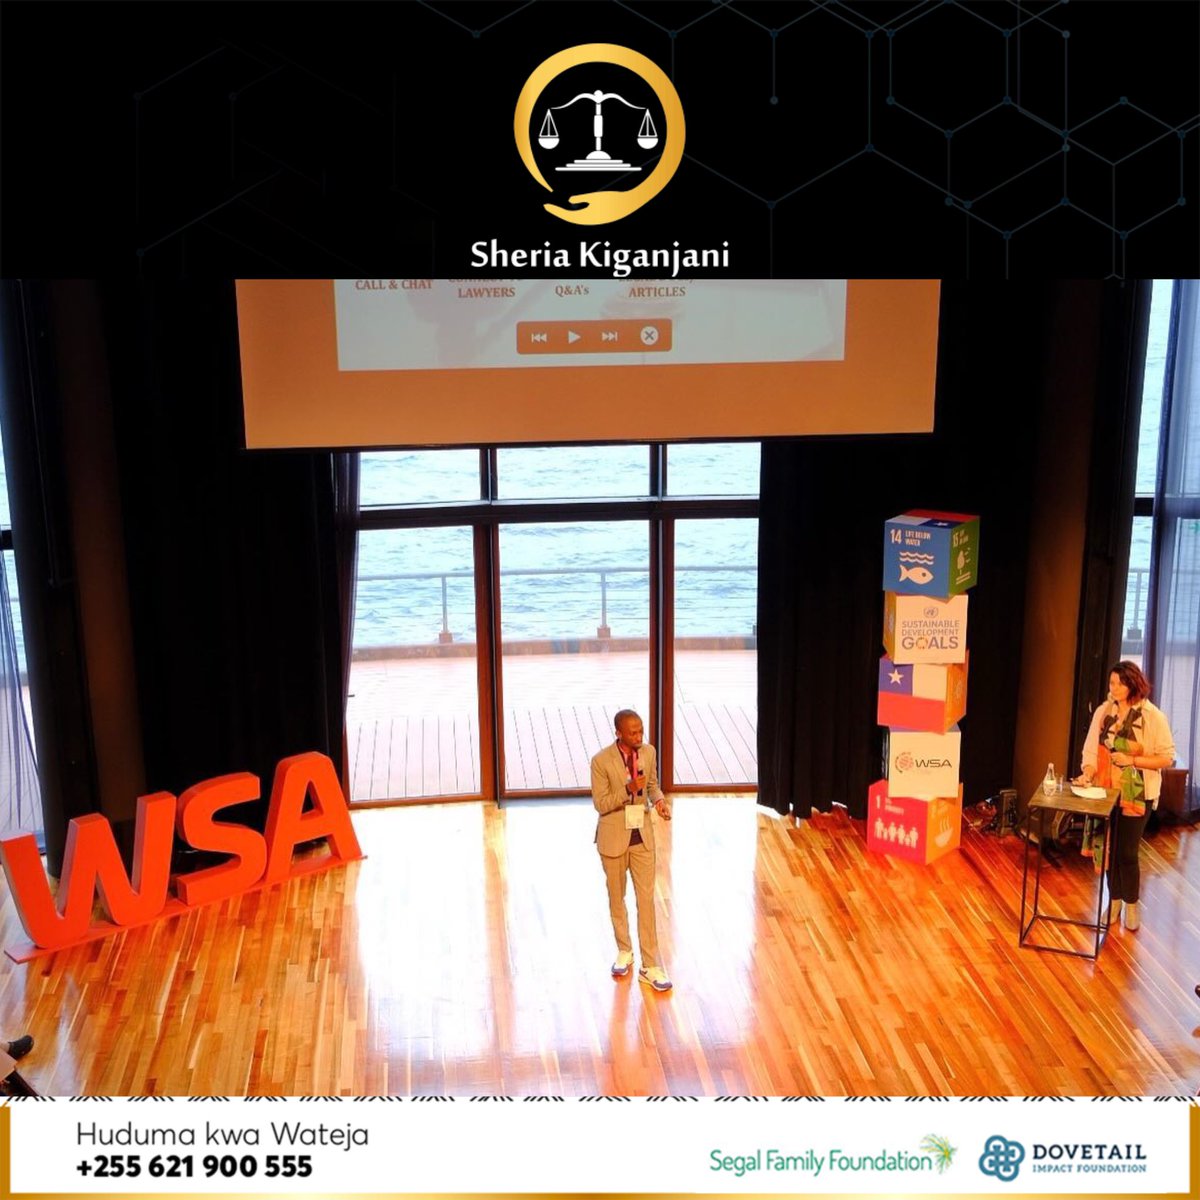 We also had the honor to share our work to congress delegates as well as receiving our award as Winners of the WSA 2023 in the Inclusion & Empowerment category. #sheriakiganjani #sheriakiganjaniapp #legaltech #legalgurus #justlers #accesstojustice #WSAWinners2023 #tanzania #chile